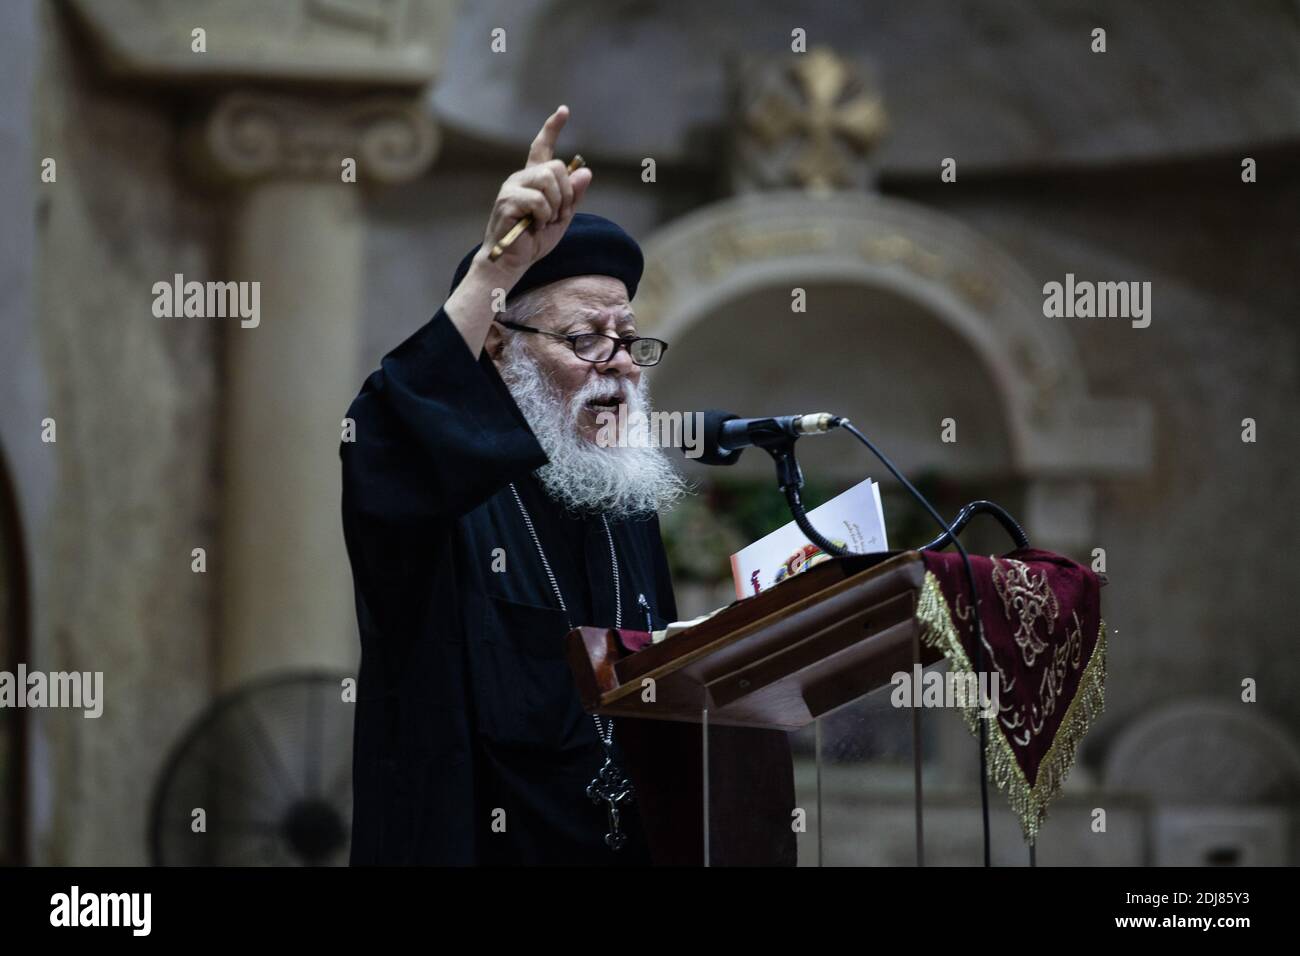 NO WEB/NO APPS - Coptic priest Father Samaan Ibrahim reads his sermon at the Saint Samaan (Simon) Church also known as the Cave Church in the Mokattam village, nicknamed as “Garbage City,” in Cairo, Egypt on August 19, 2016. Once a week hundreds of Muslims gather at the church after the prayer, to attend a session of exorcism performed by the priest. With a cross and holy water he fights spiritual entities and demons. The Monastery has an amphitheater with a seating capacity of 20,000 making it the largest Christian church in the Middle East. It is named after the Coptic Saint, Simon the Tanne Stock Photo